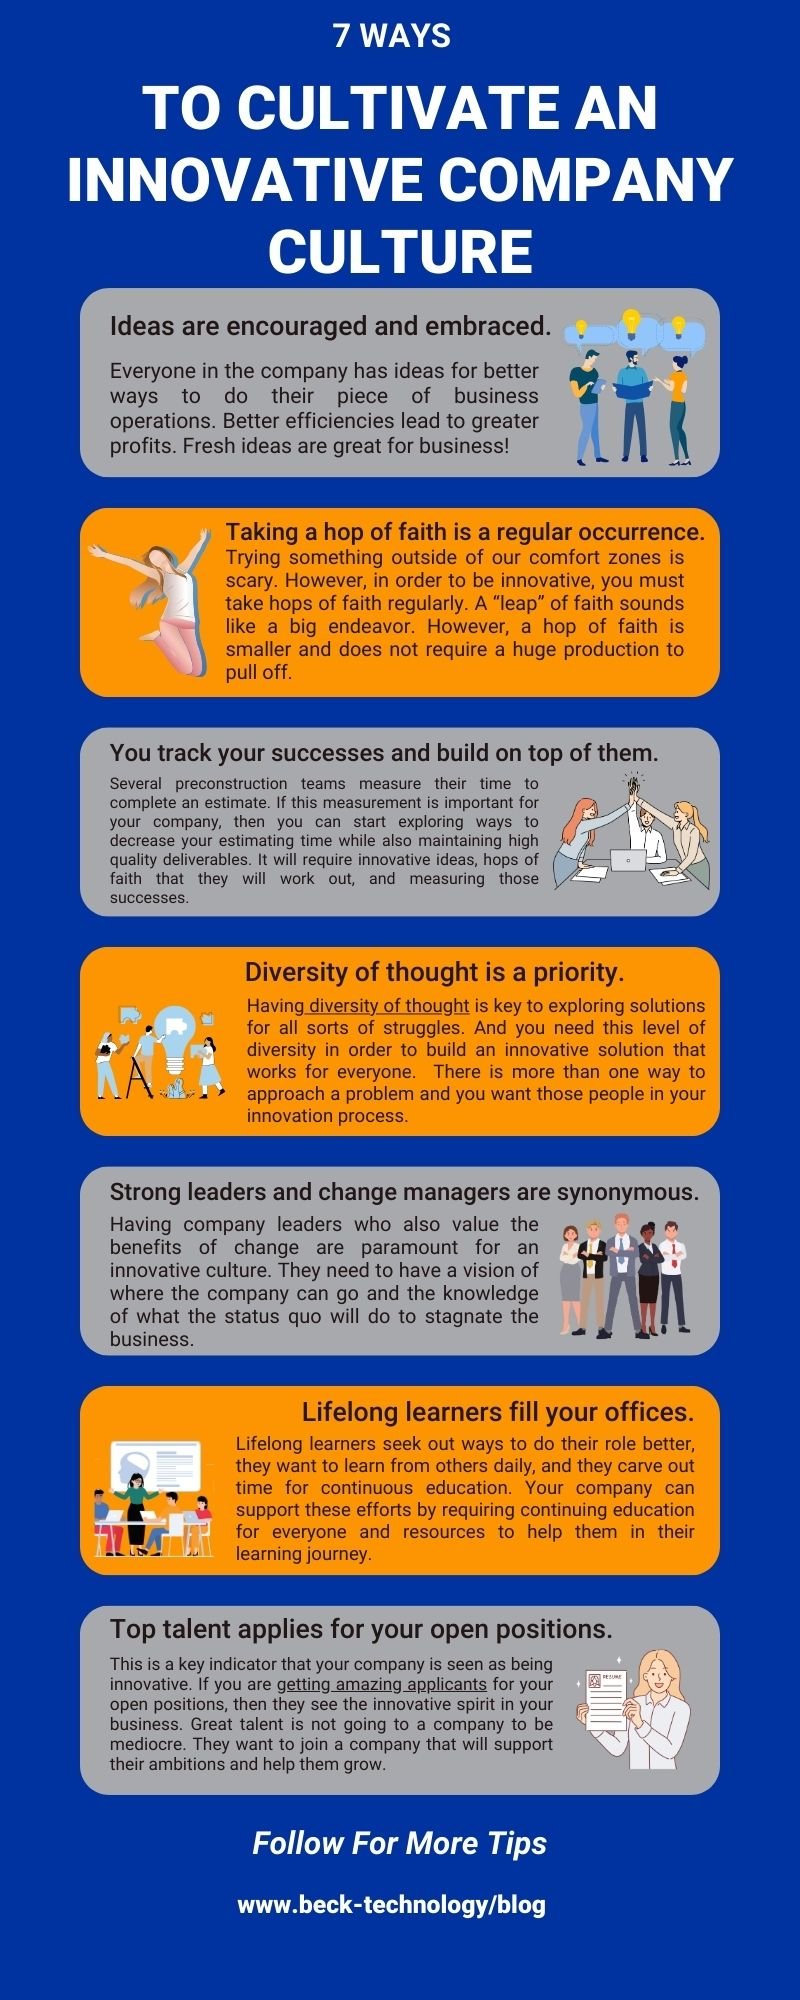 7 Ways to Cultivate an Innovative Culture Infographic